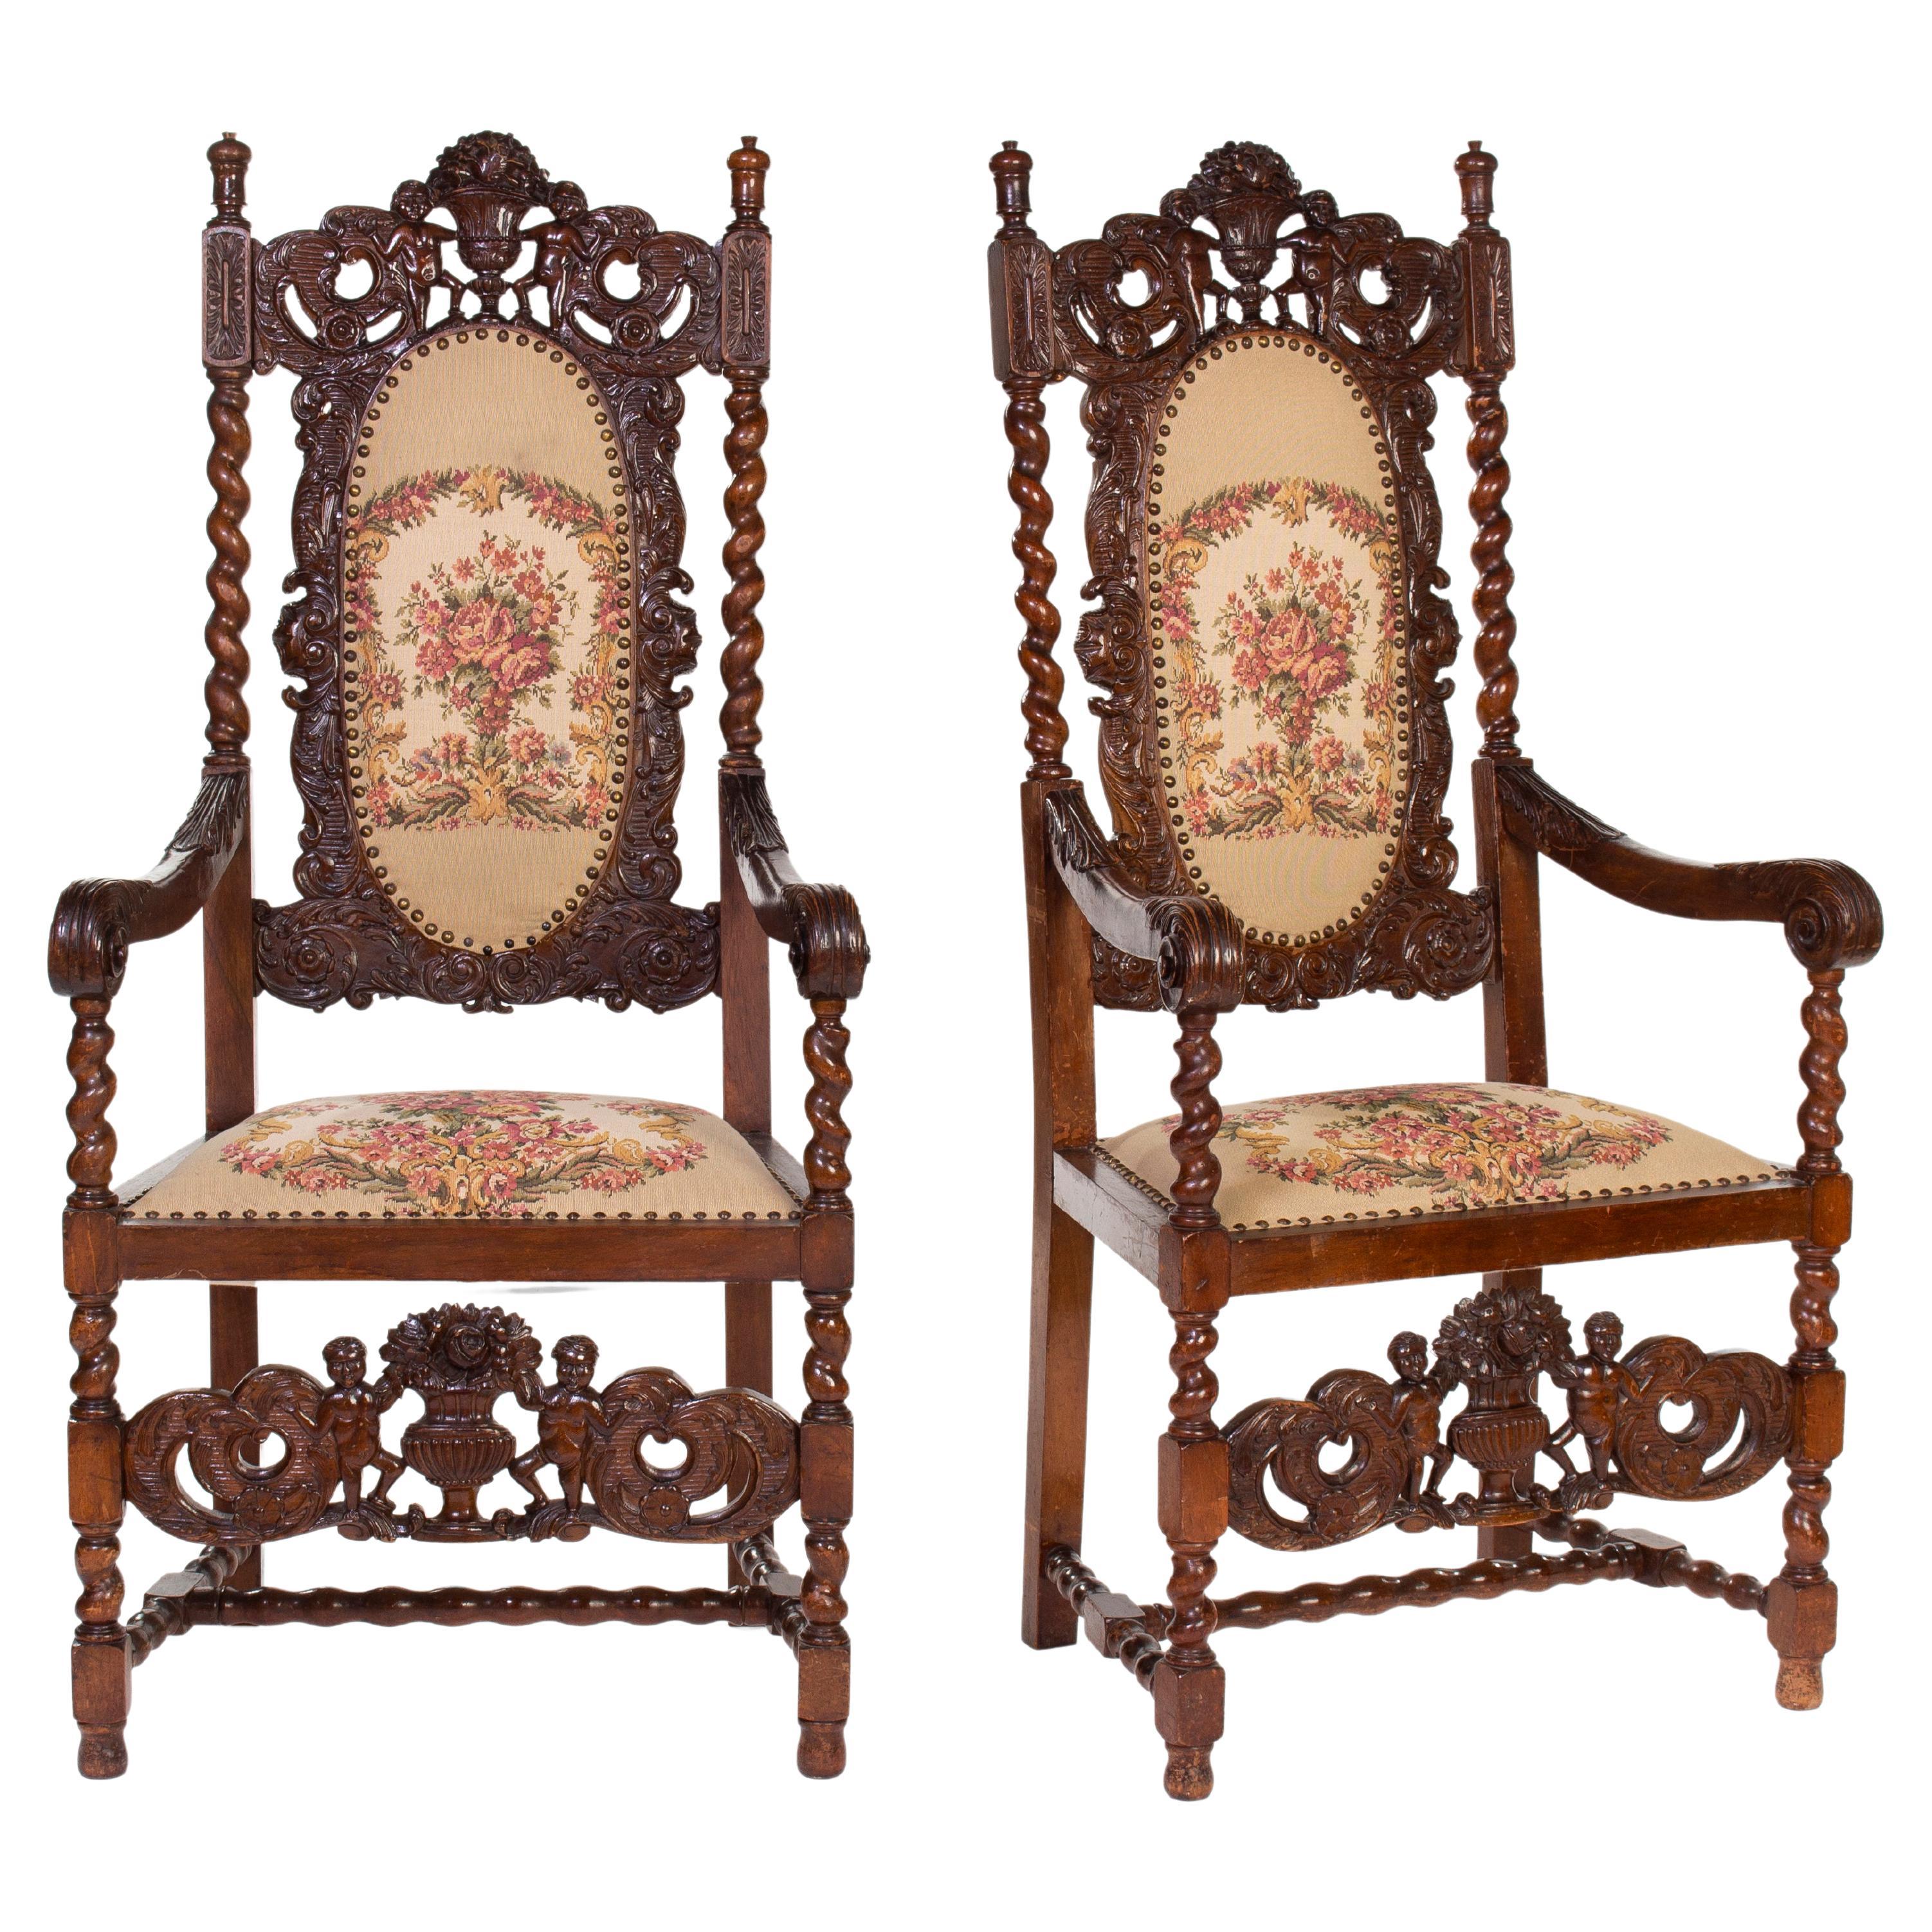 Antique Carved Basswood Throne Chairs in Pair, ca. 1900 '2 Pieces'